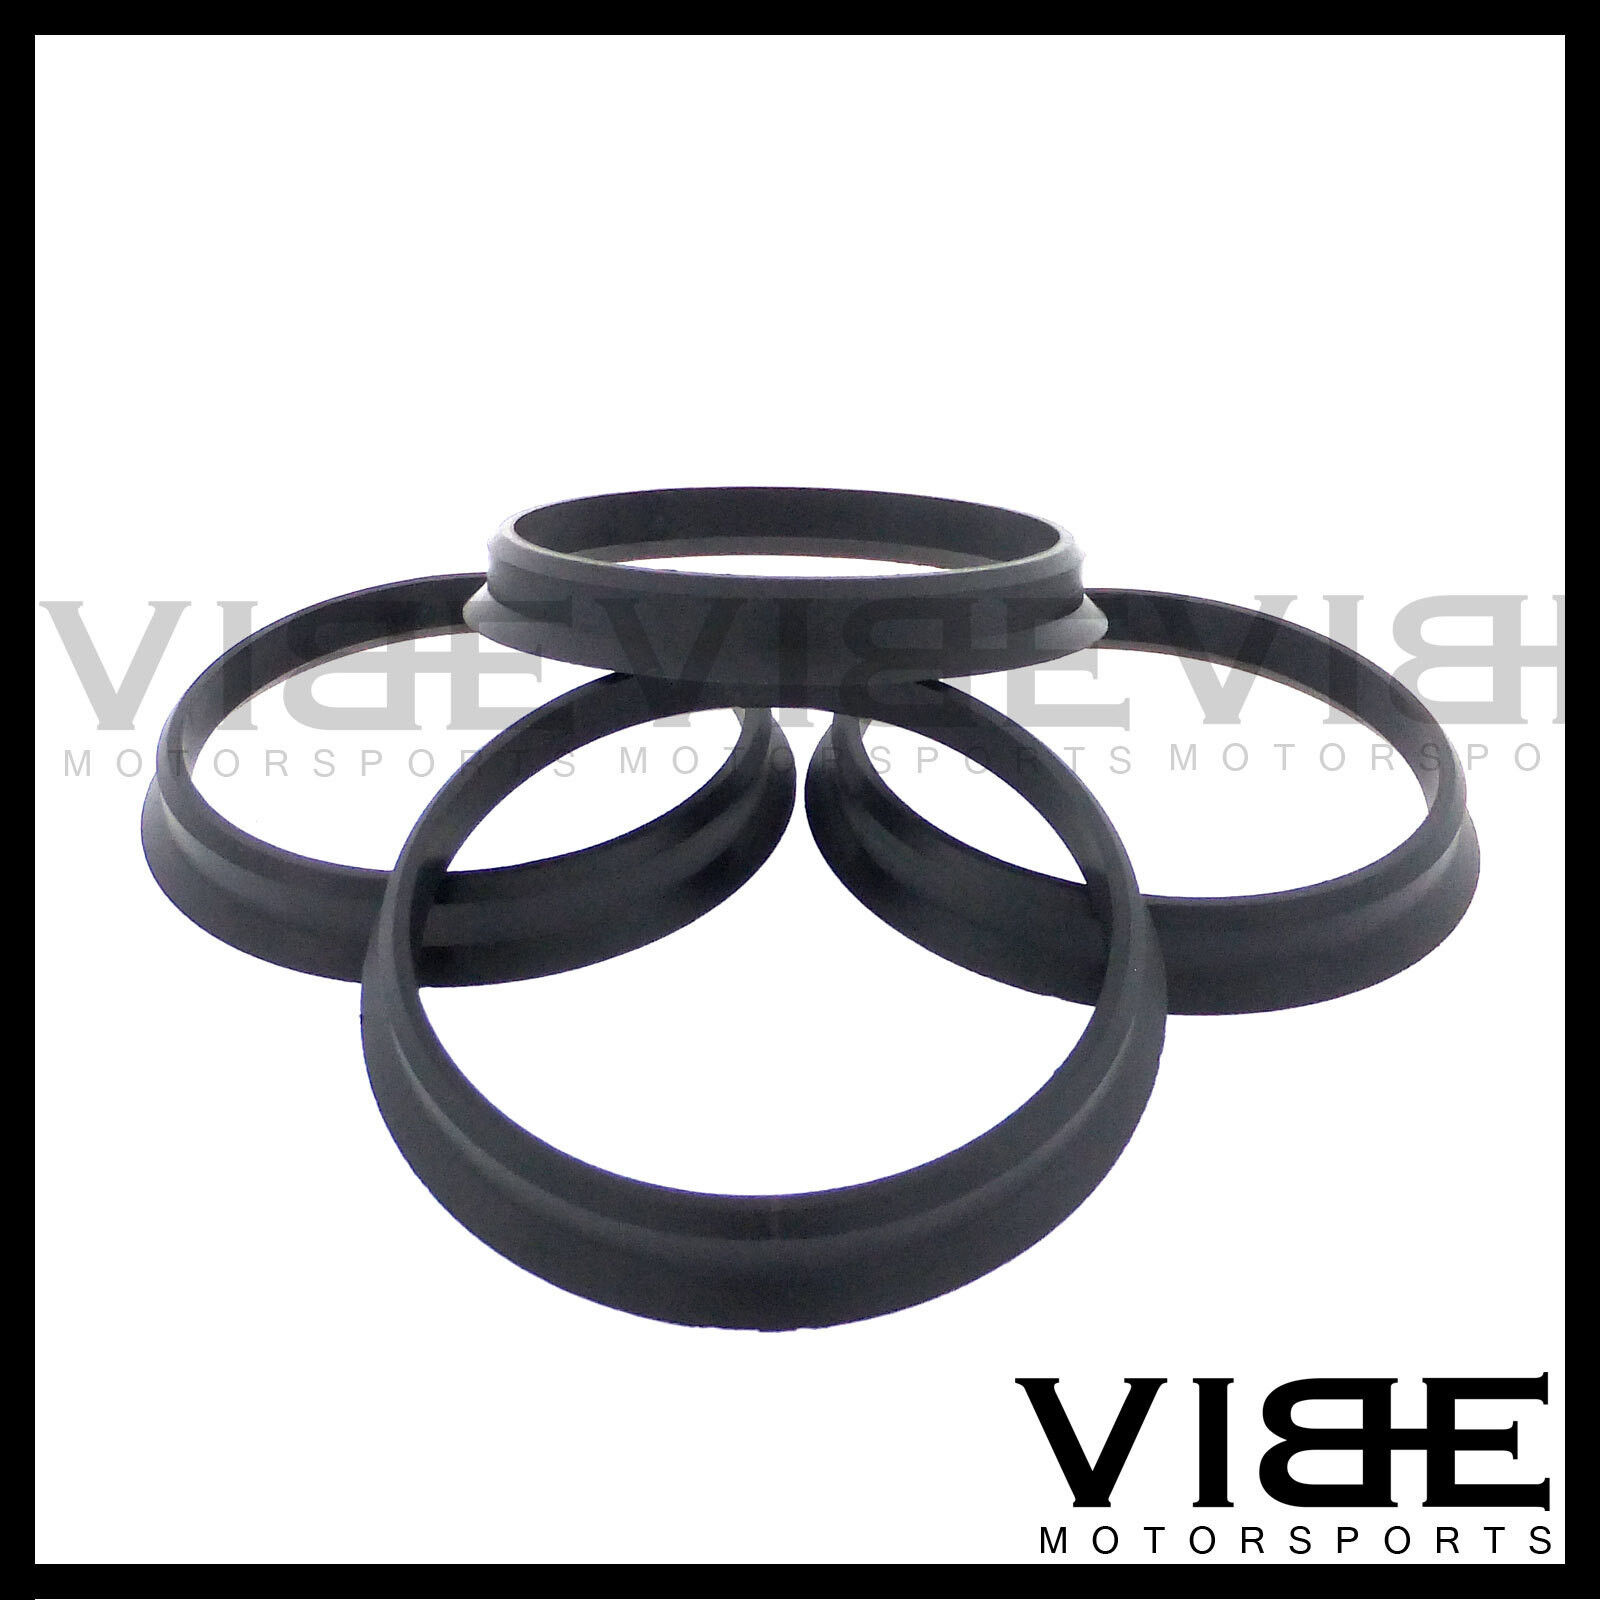 74.1 TO 72.56 HUB CENTRIC WHEEL CENTERING RINGS OD=74.1 ID=72.56 74mm TO 72.56mm